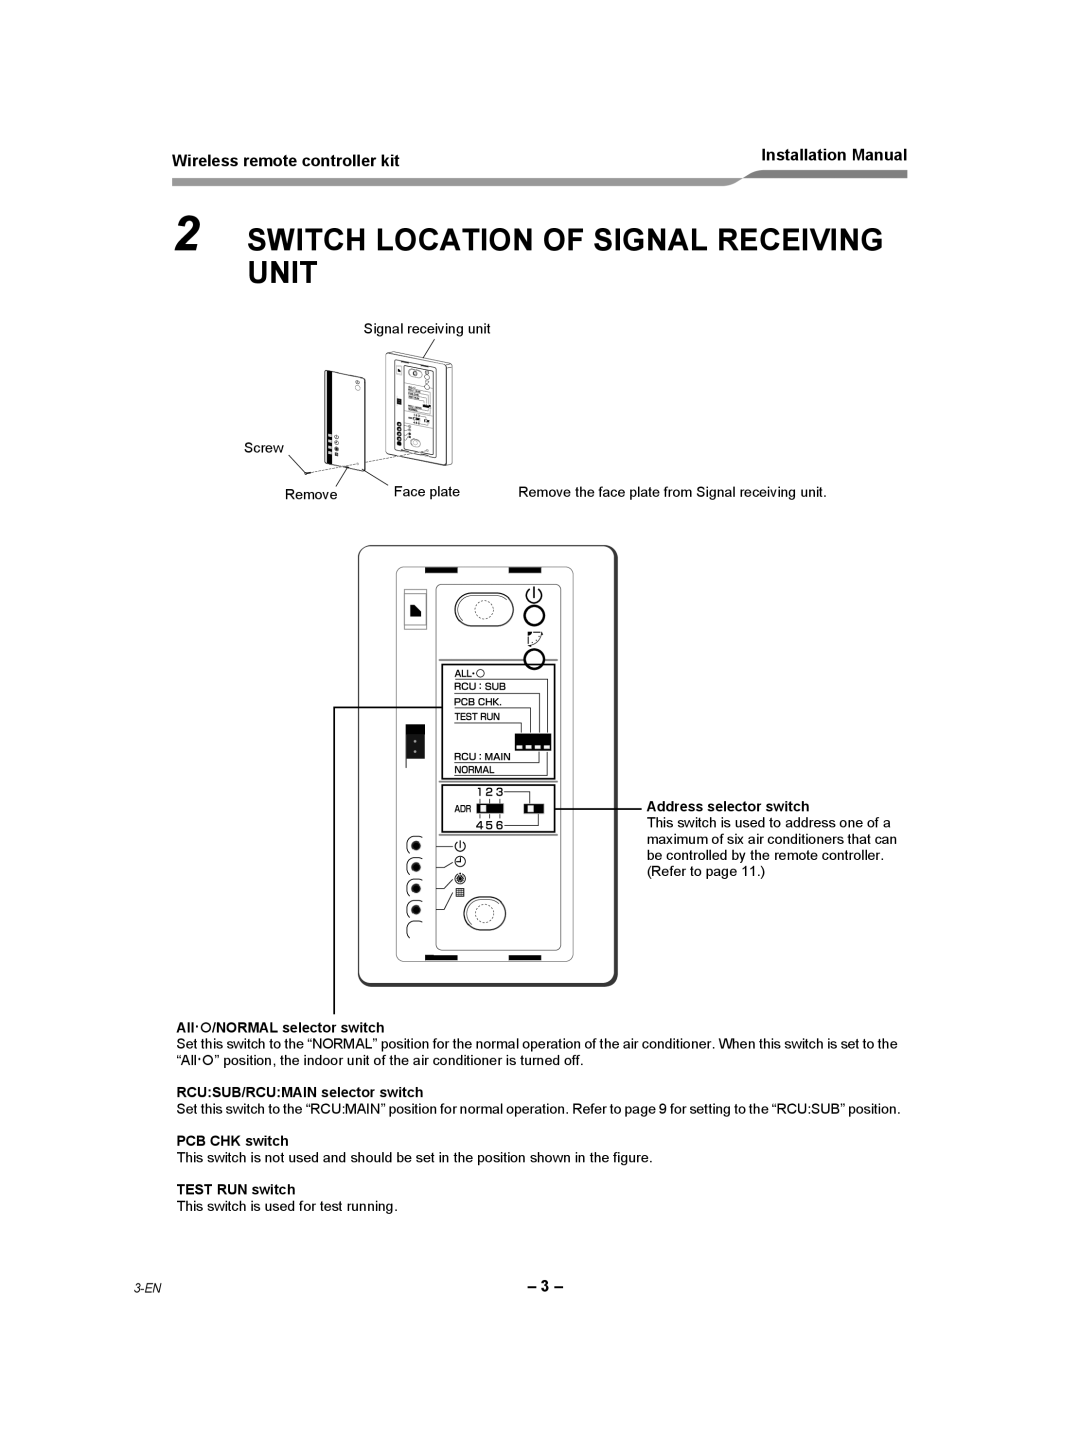 Toshiba TCB-AX21UL Switch Location Of Signal Receiving Unit, Wireless remote controller kit, Installation Manual, 3-EN 